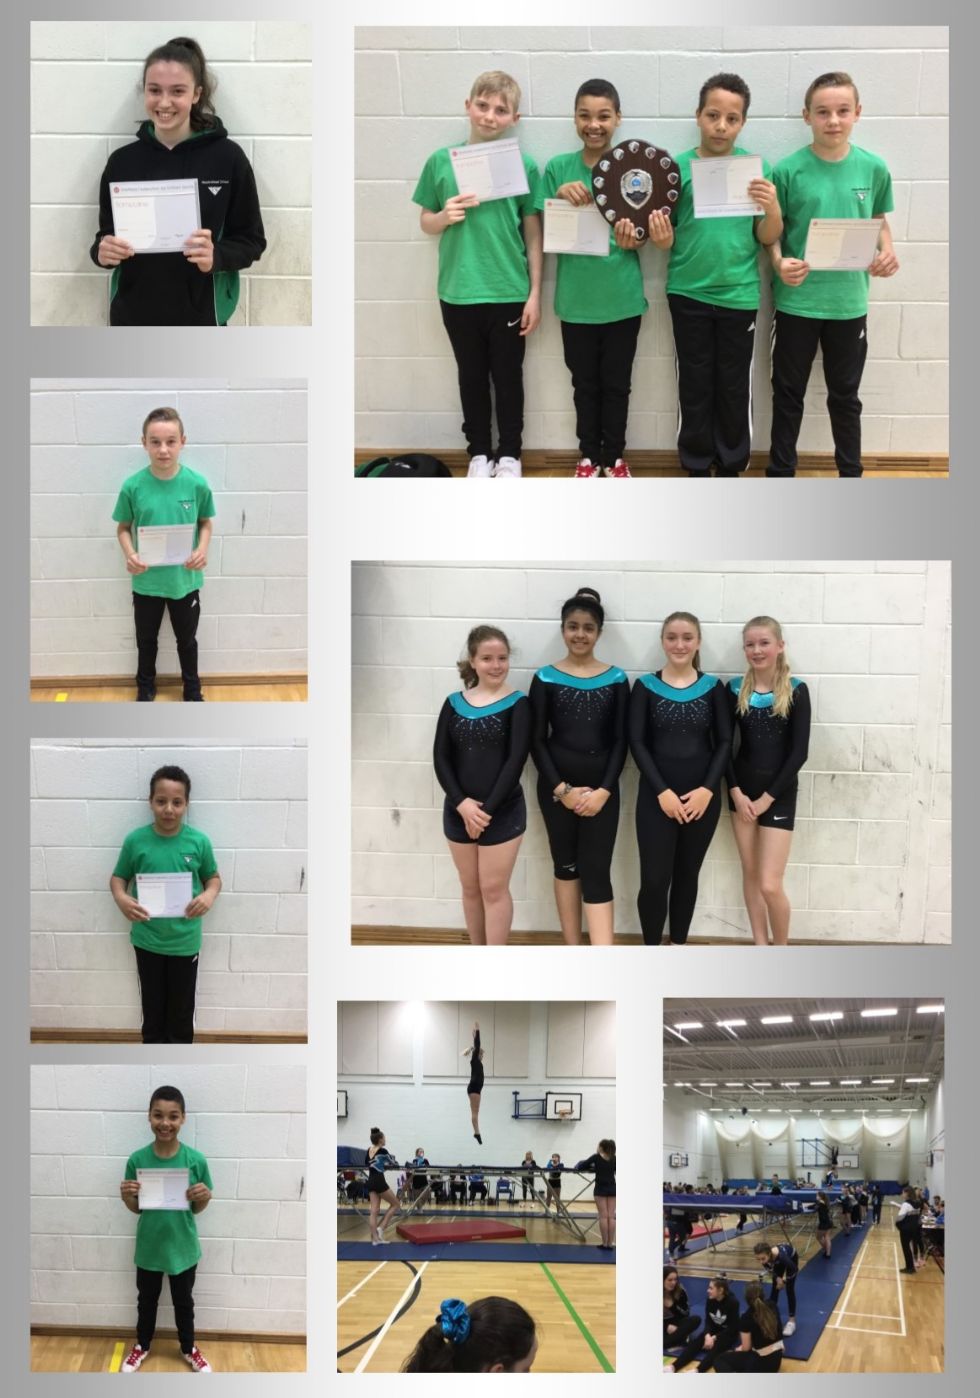 trampolining competition 